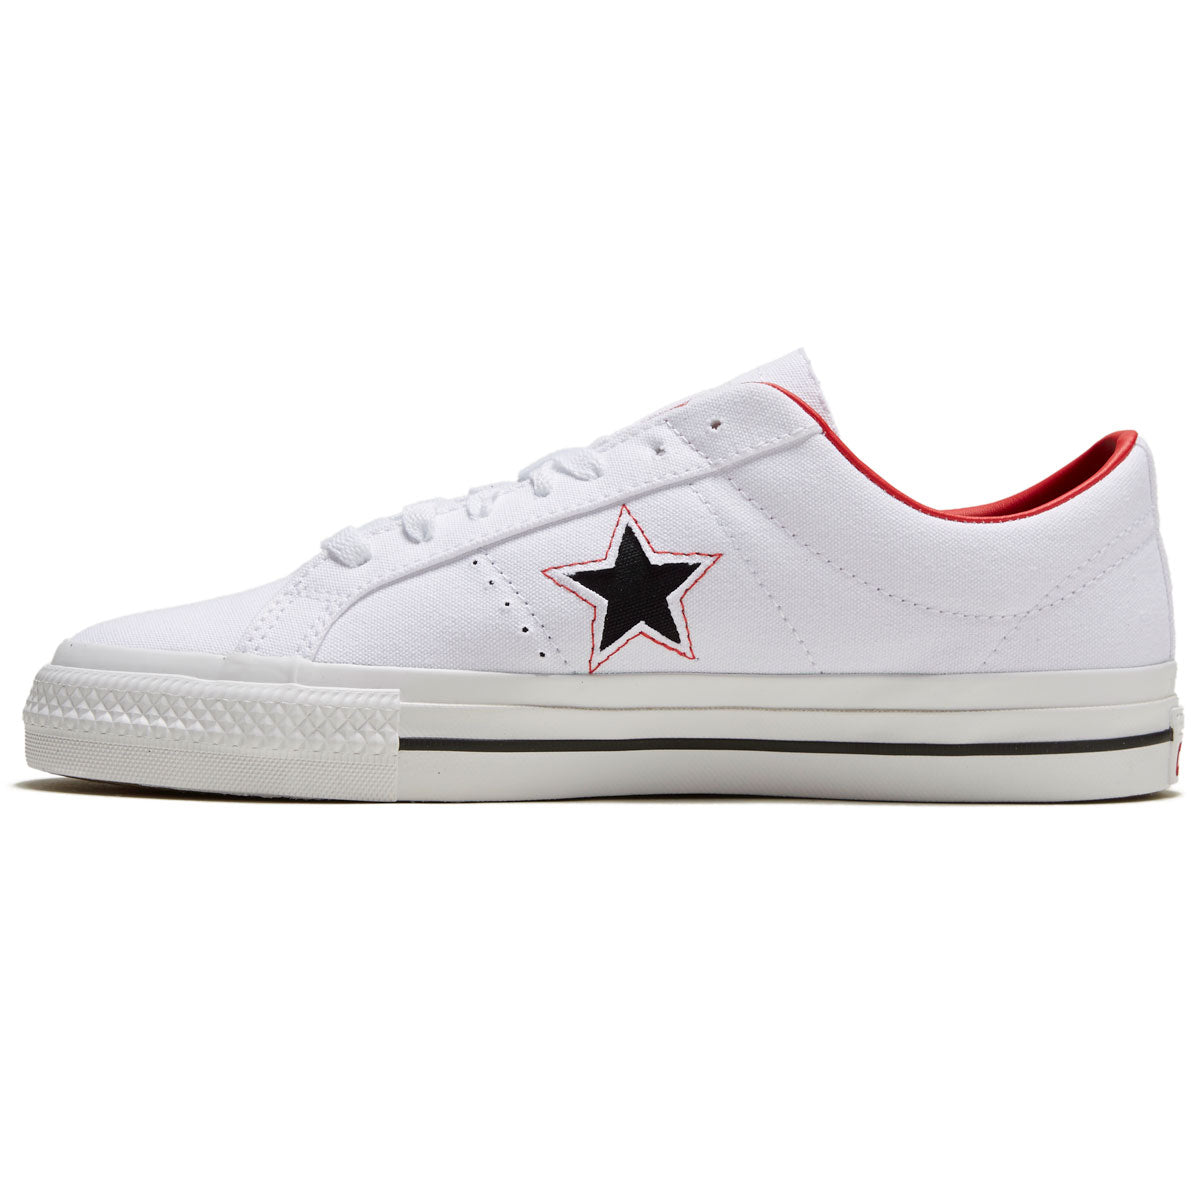 Converse One Star Pro Lips Shoes - White/Black/Red image 2